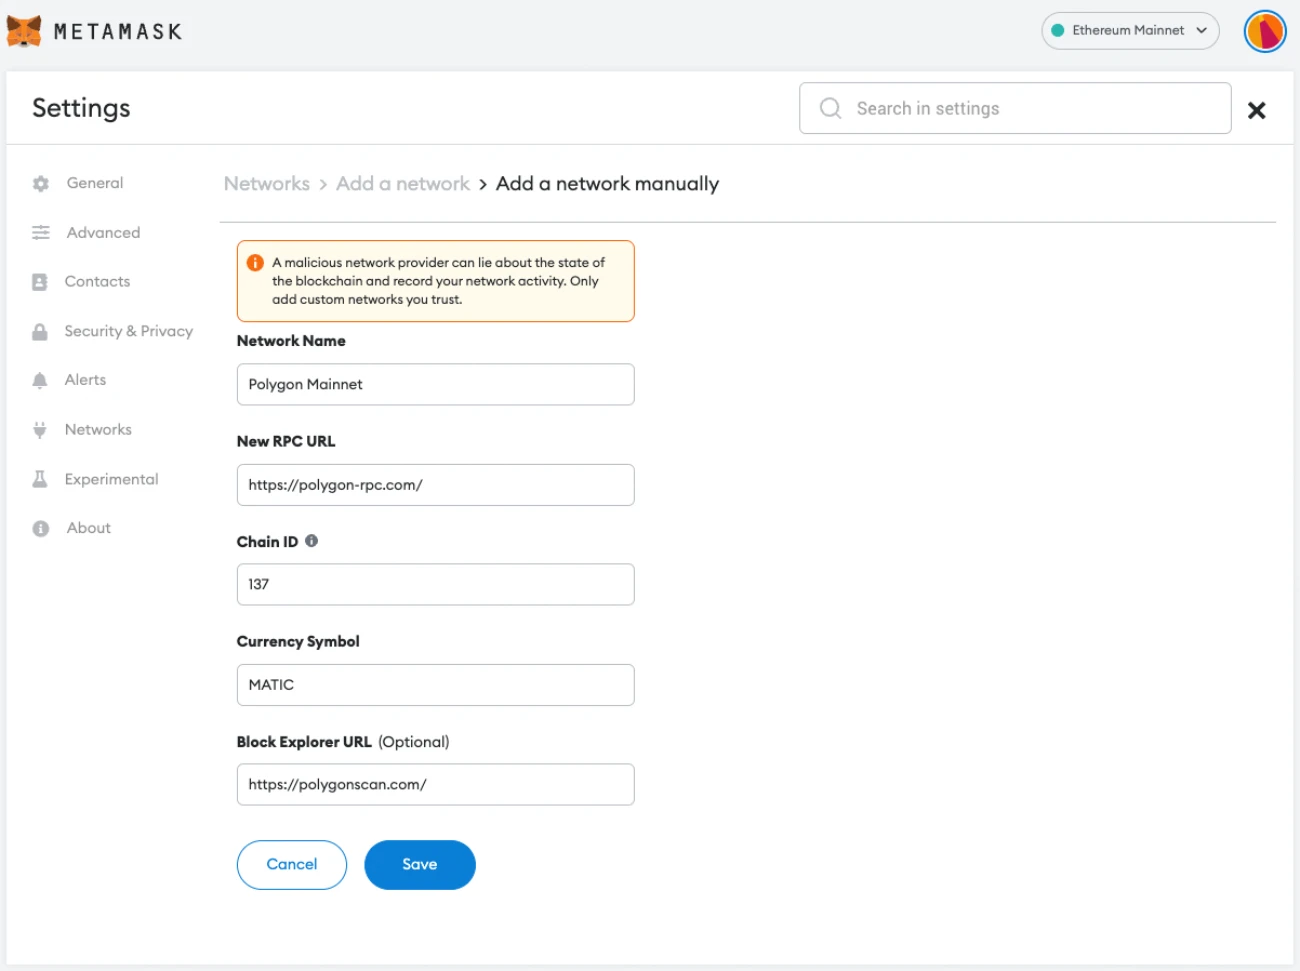 Step-by-step guide on how to configure Metamask to interact with the Polygon network